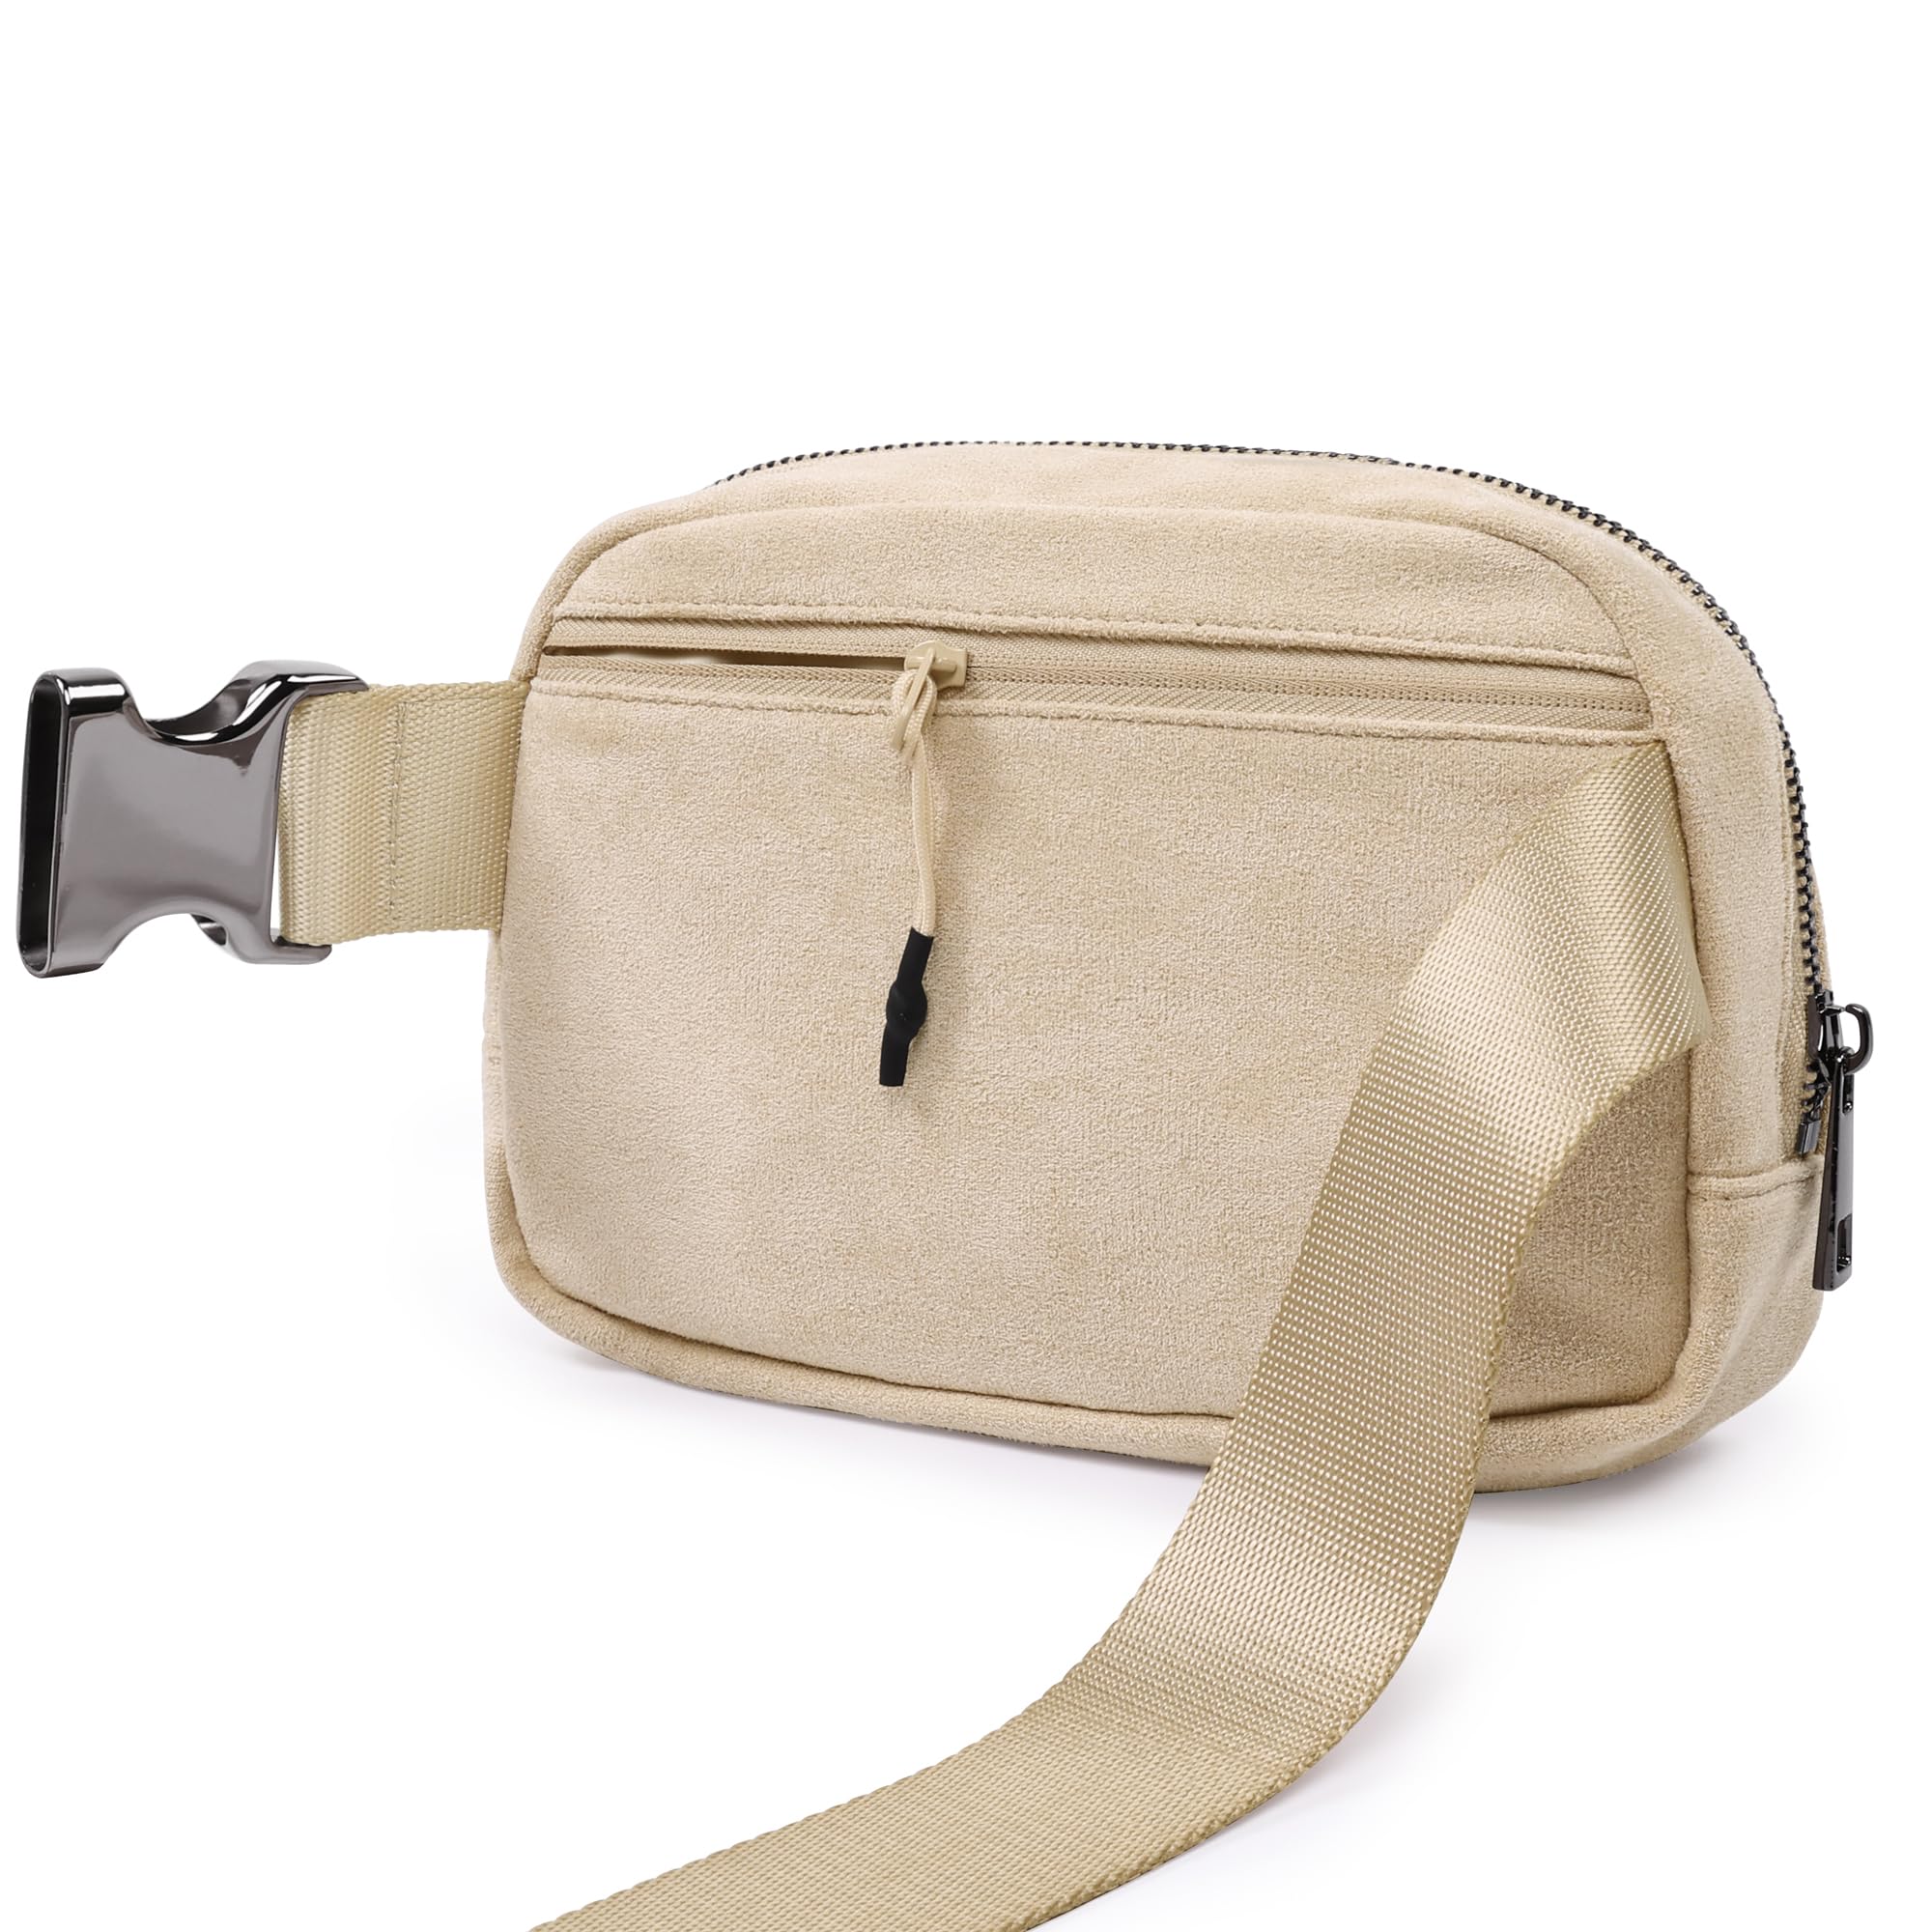 ODODOS Unisex Mini Belt Bag with Adjustable Strap Small Fanny Pack for Workout Running Traveling Hiking, Faux Suede Ivory